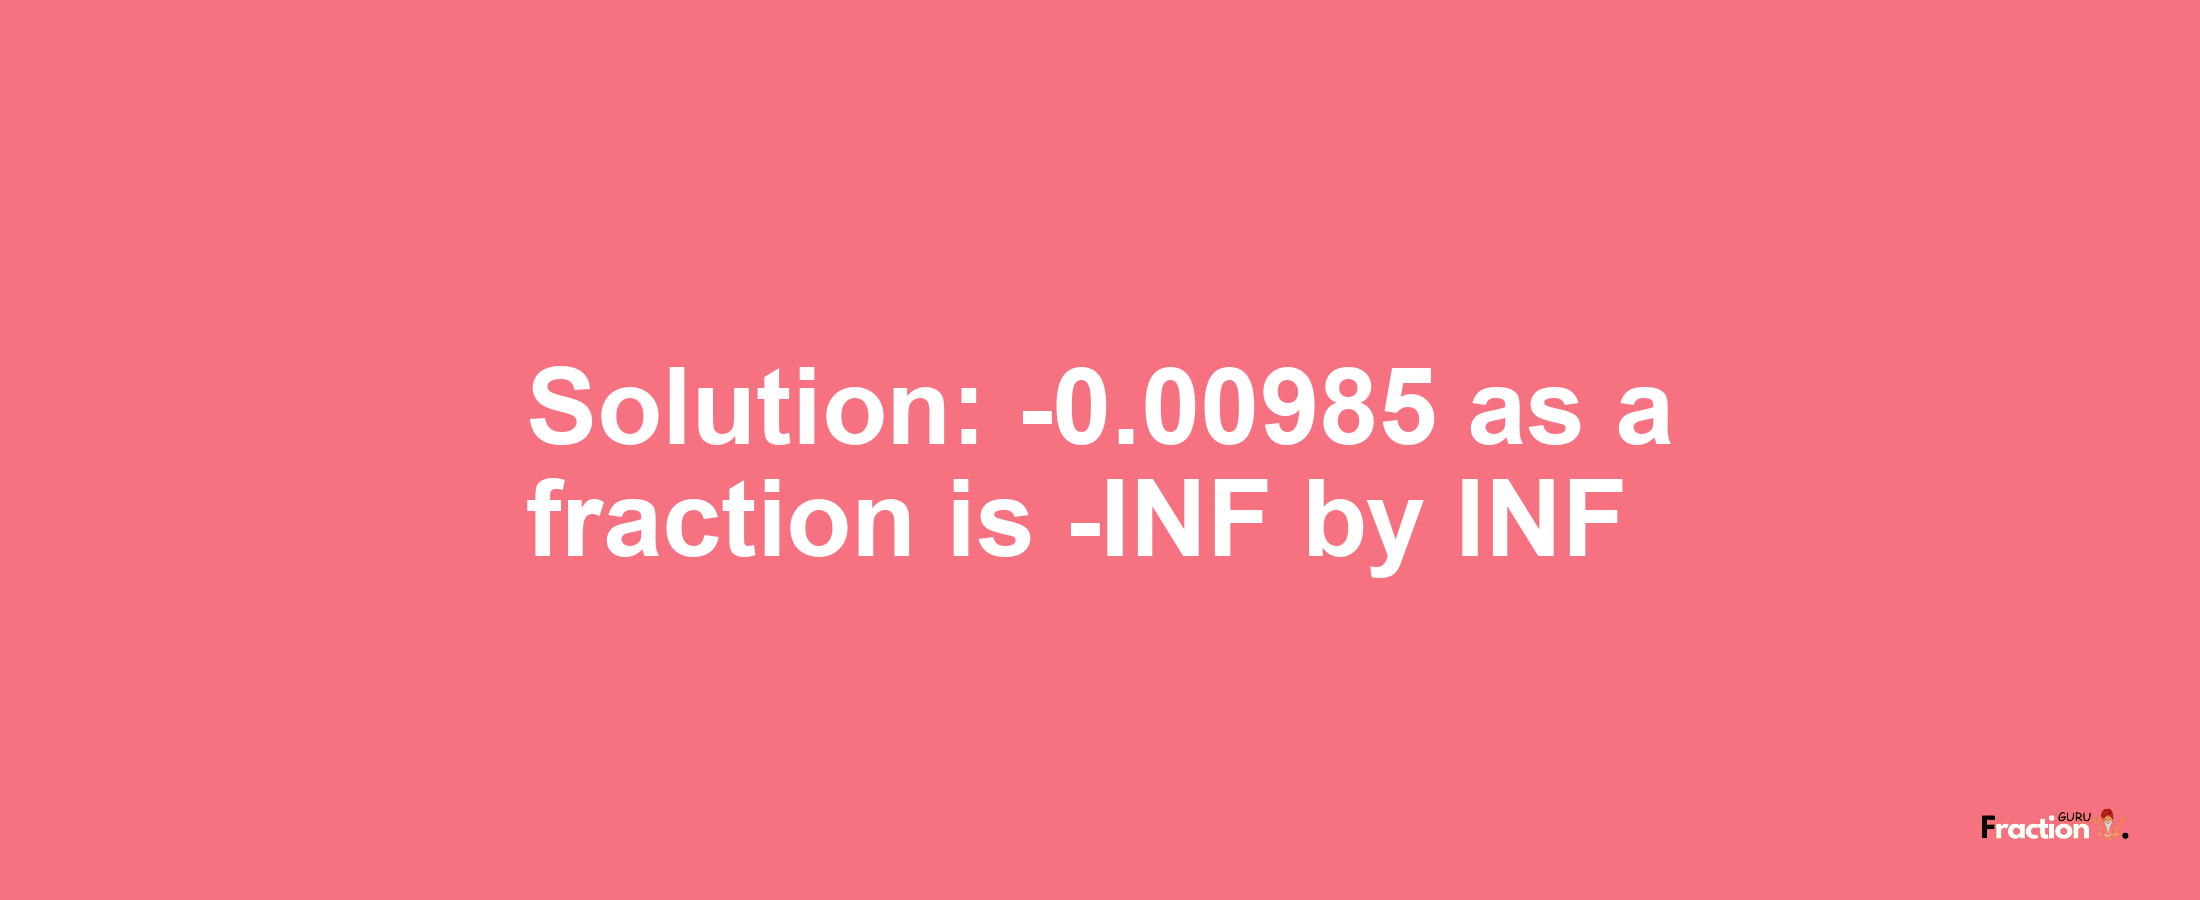 Solution:-0.00985 as a fraction is -INF/INF